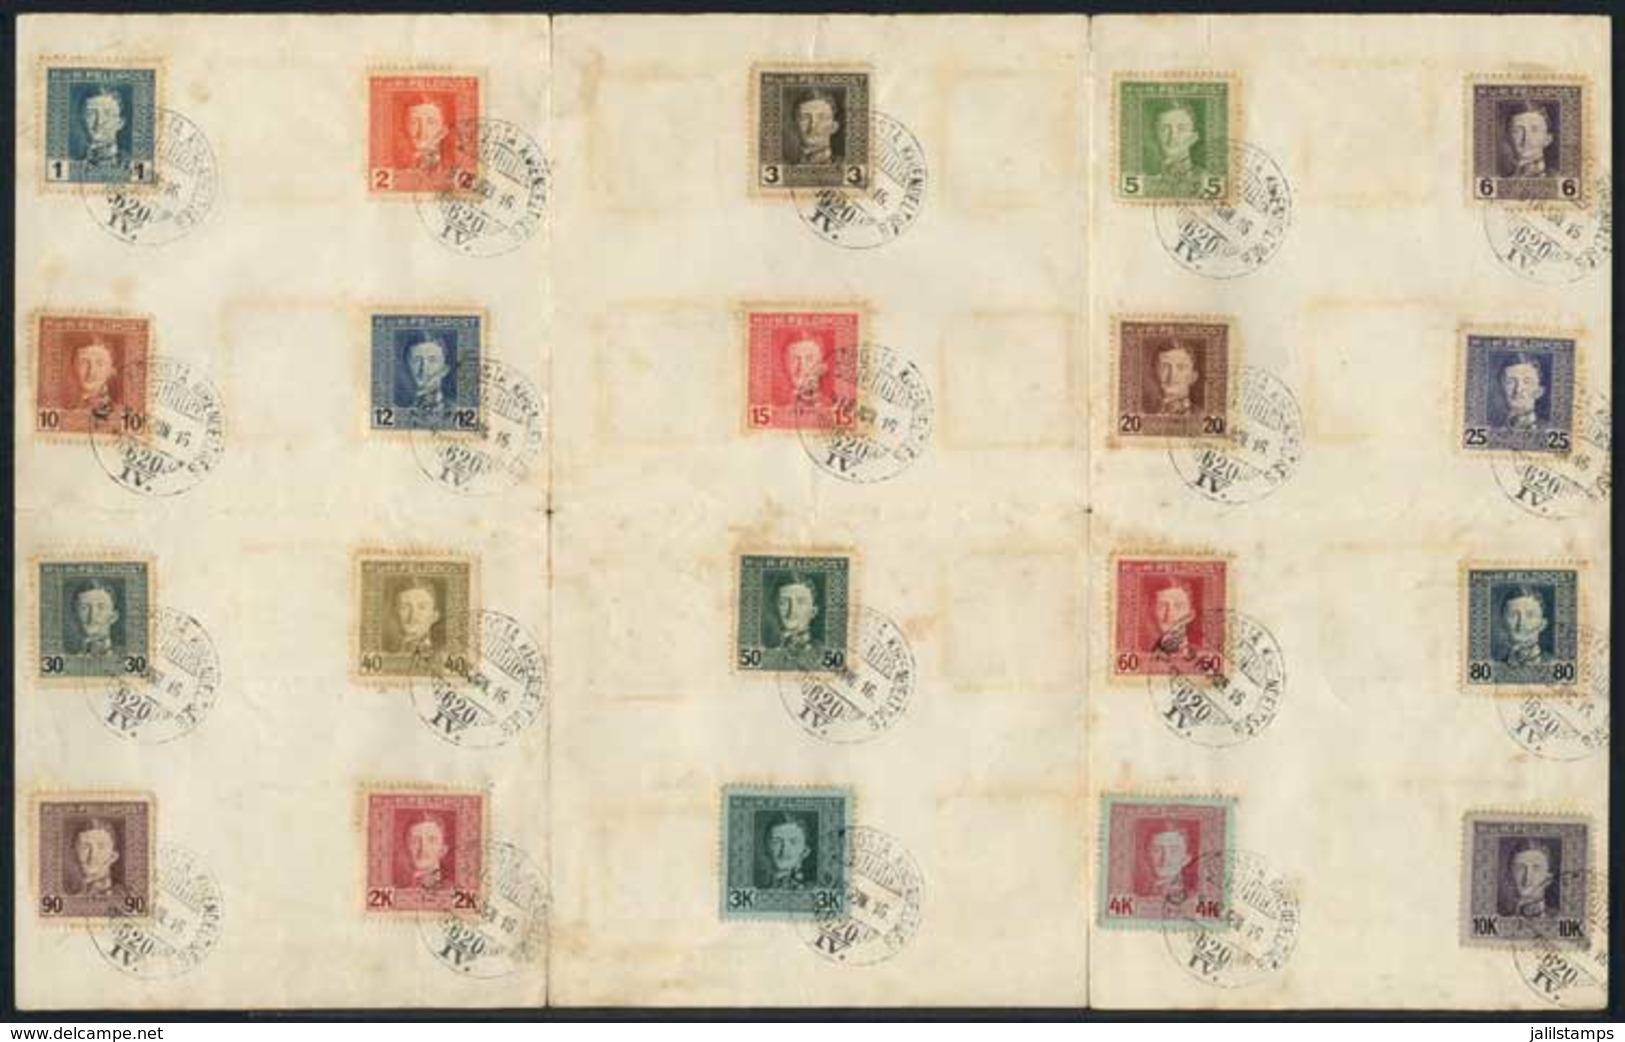 AUSTRIA-HUNGARY: Sc.M49/68, Complete Set Of 20 Values On A Sheet With Cancel Of 16/JUN/1918, Fine Quality, Interesting! - Gebraucht